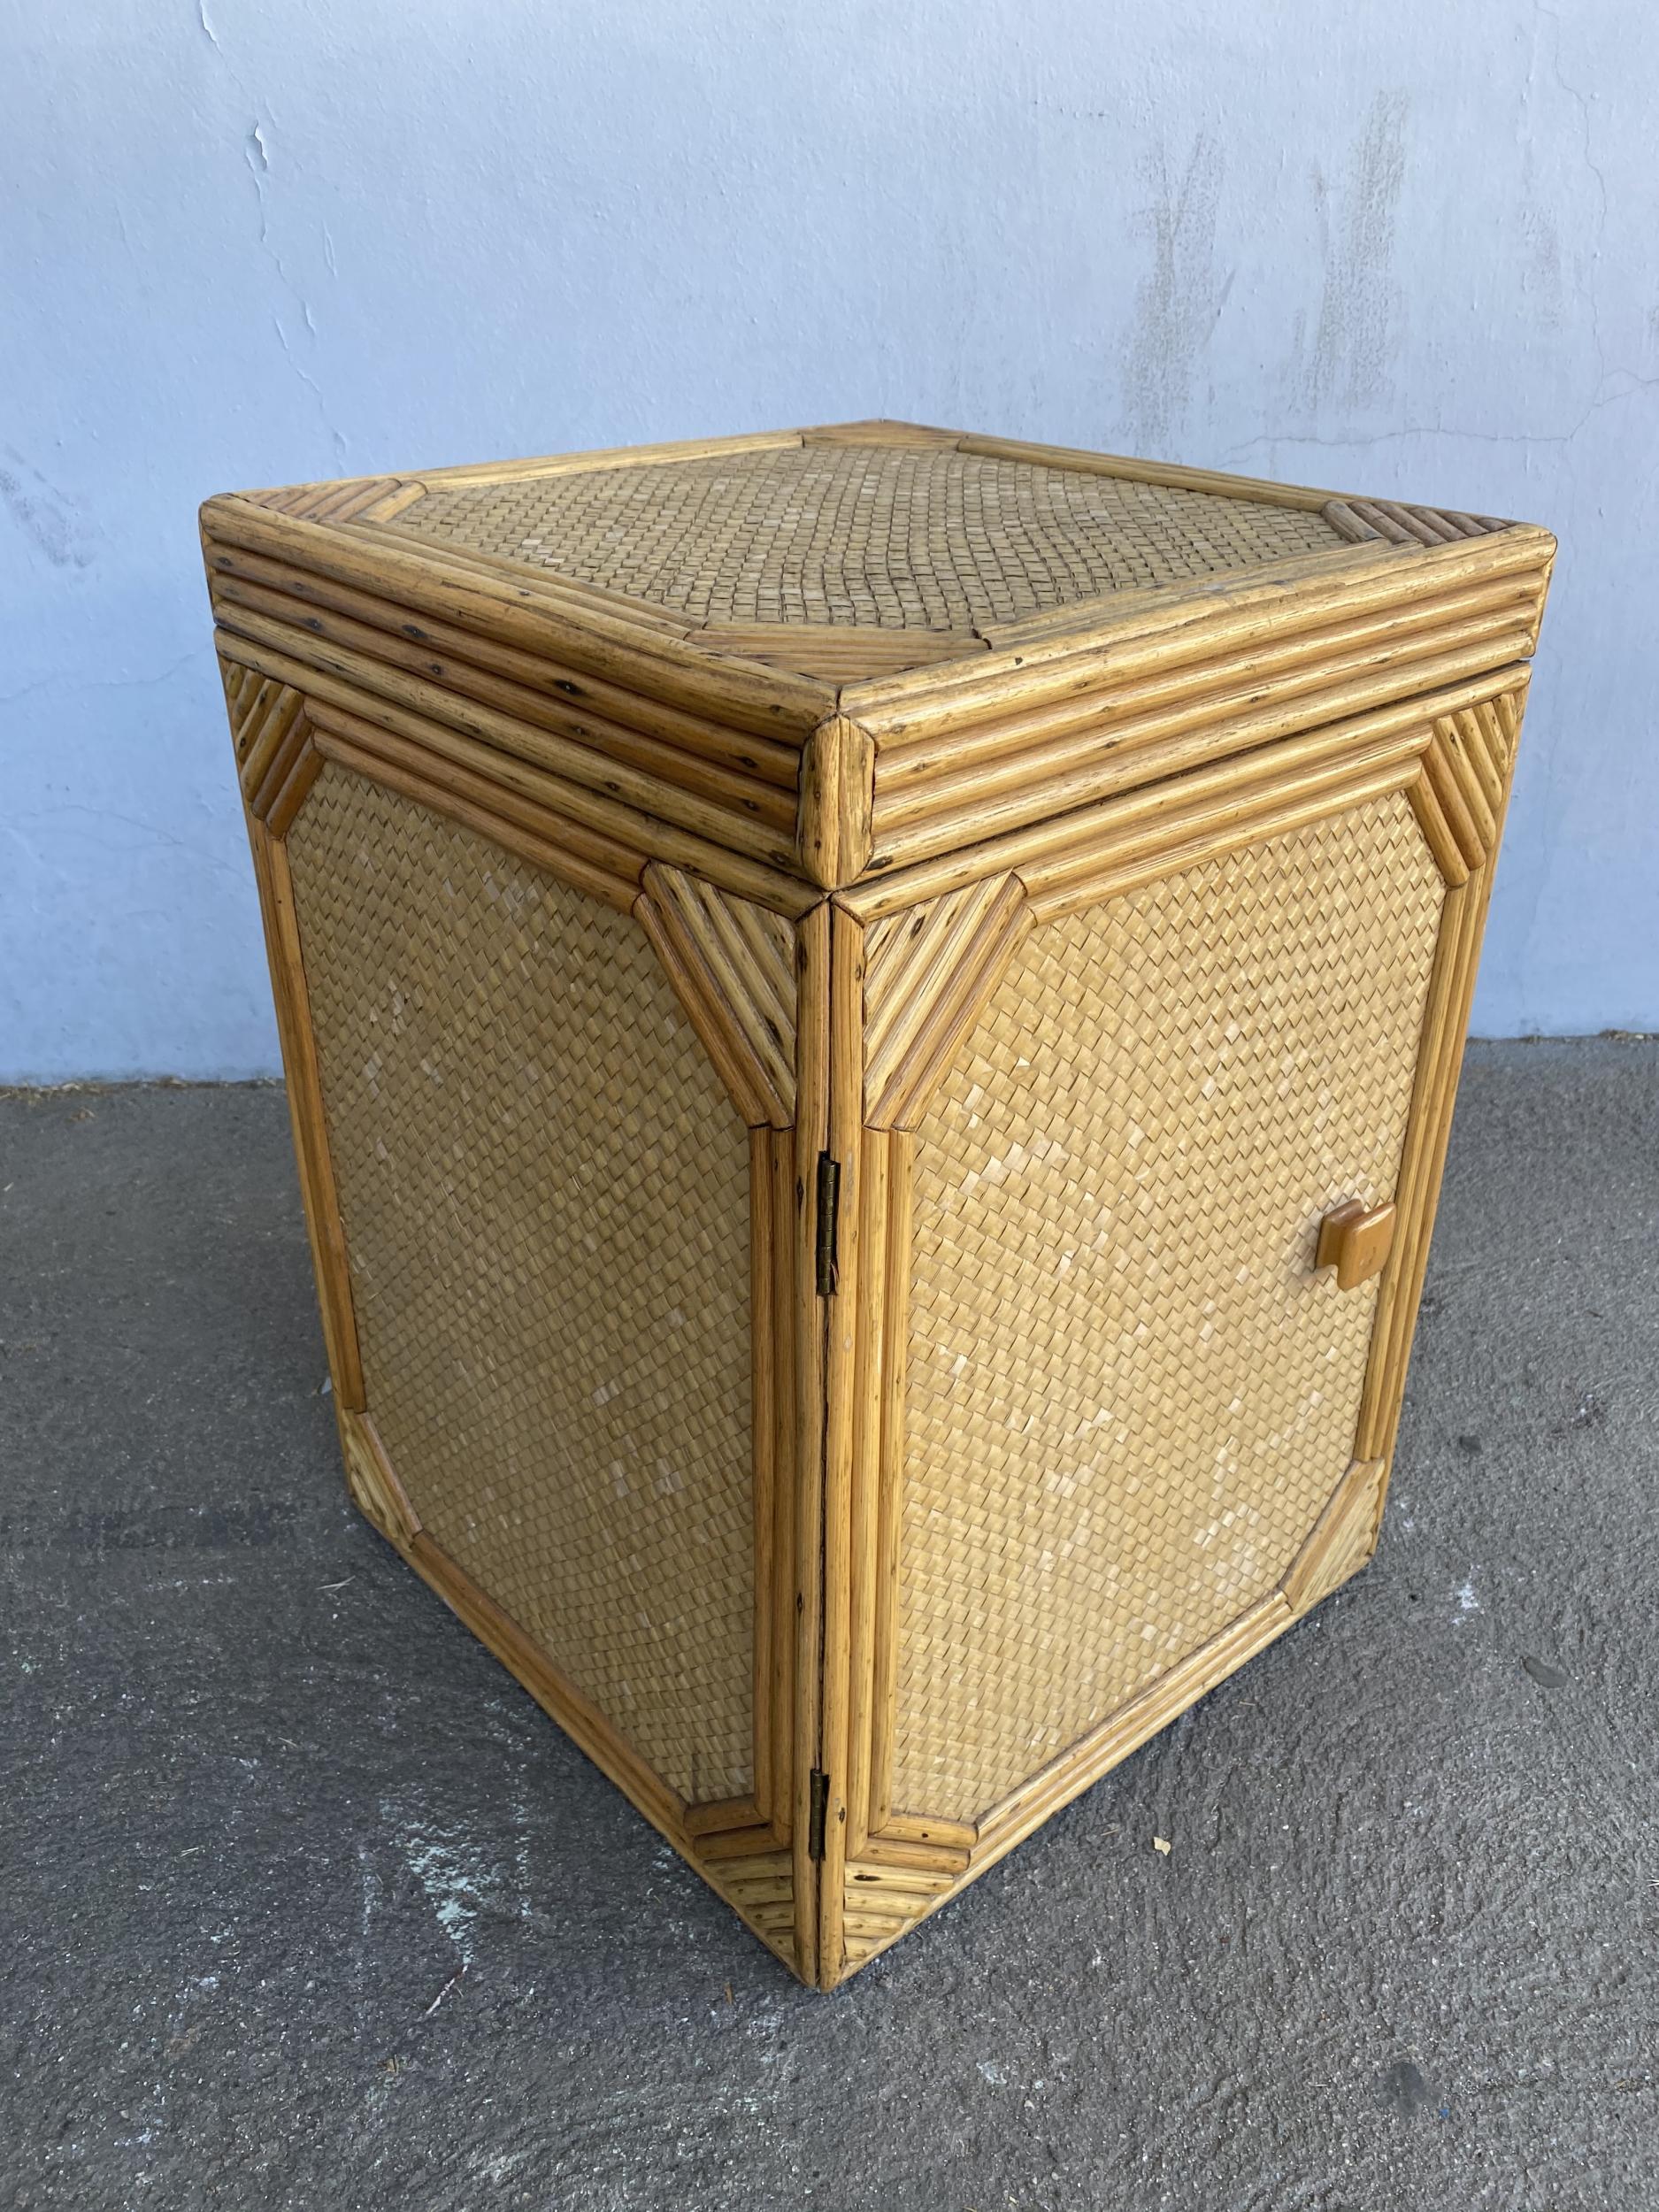 Original 1960s woven wicker and stick rattan box side table with a single cabinet door along the front. 

Restored to new for you.

All rattan, bamboo and wicker furniture has been painstakingly refurbished to the highest standards with the best